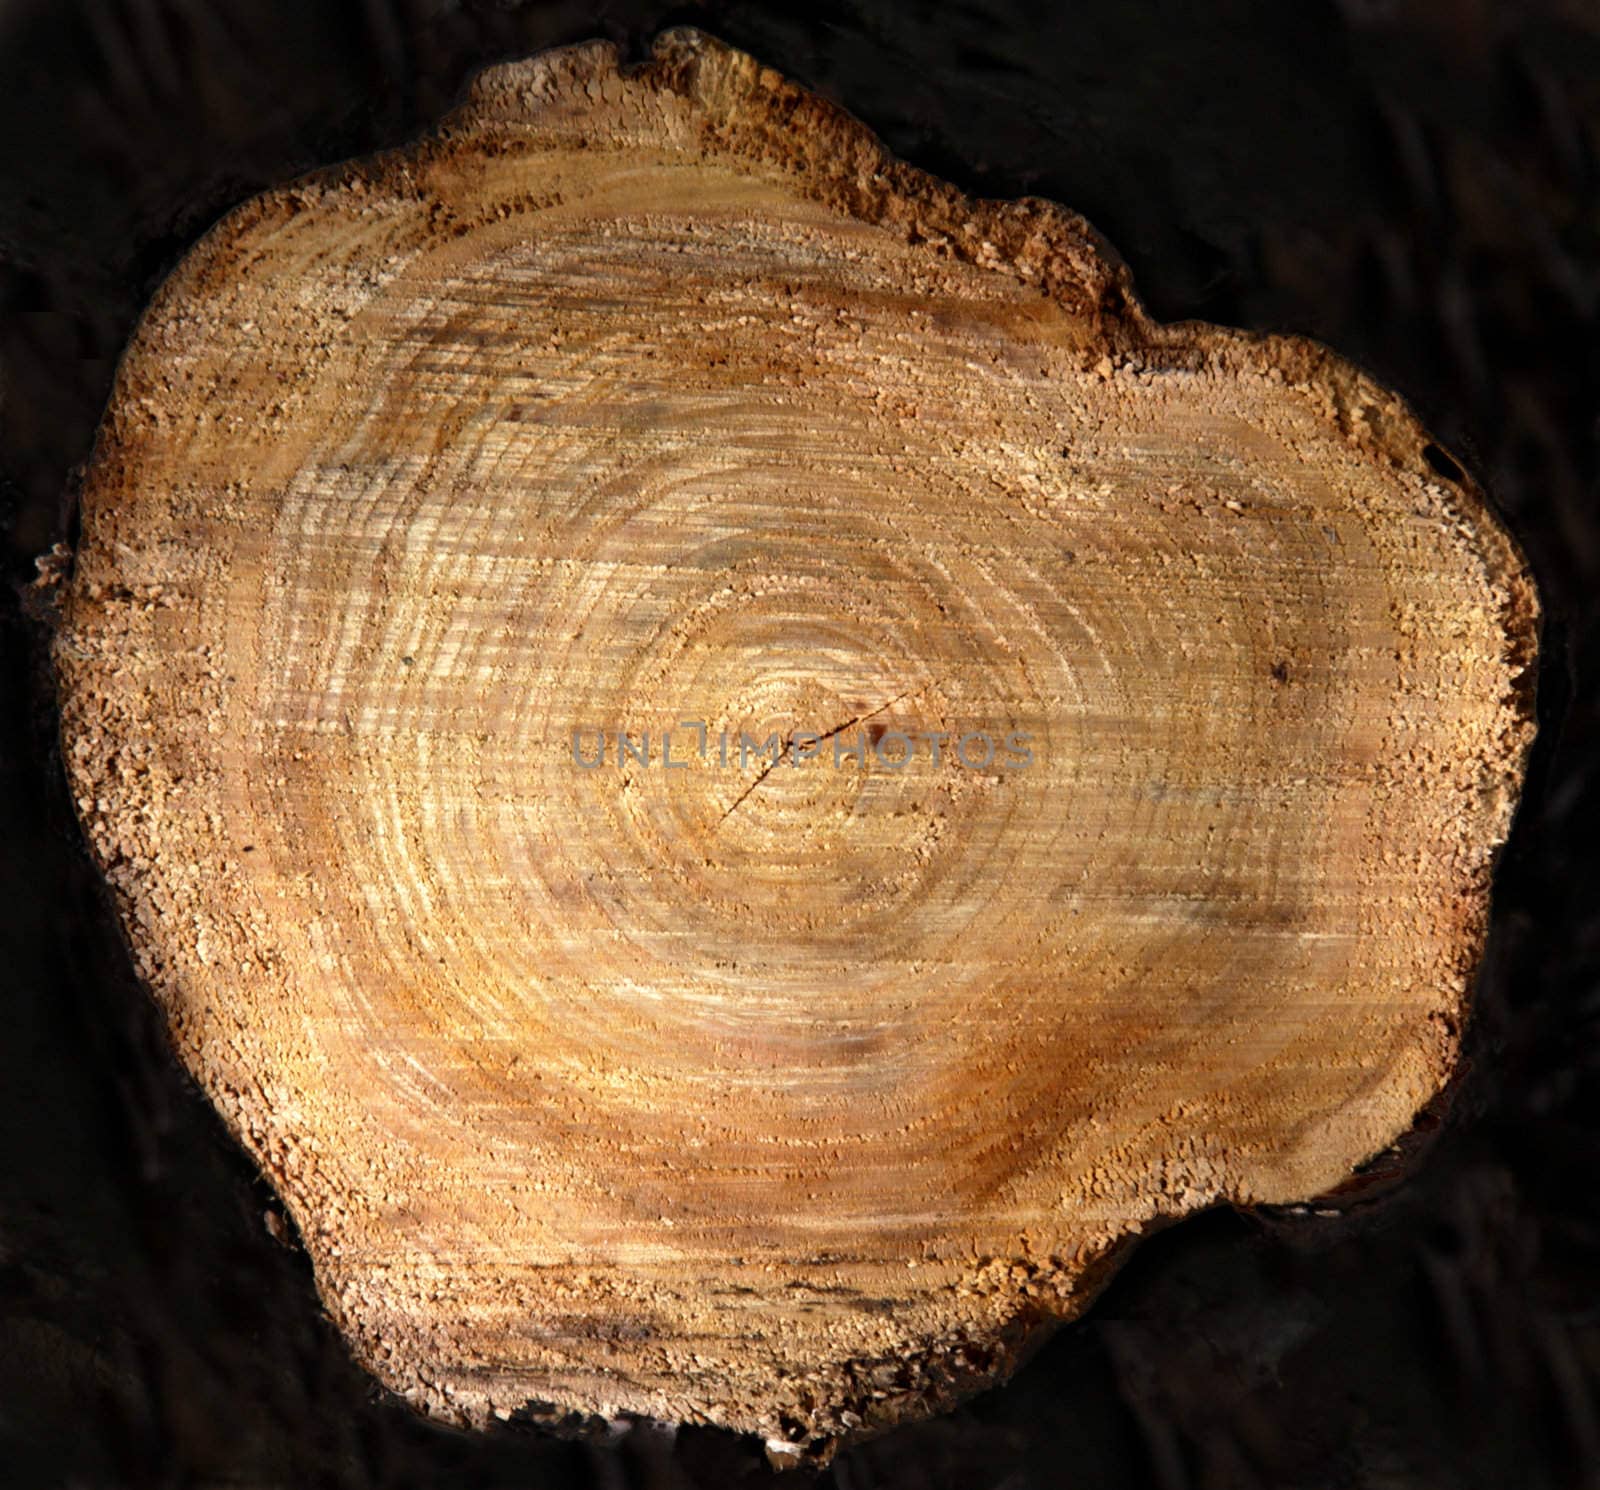 The cross section of tree stump against black.